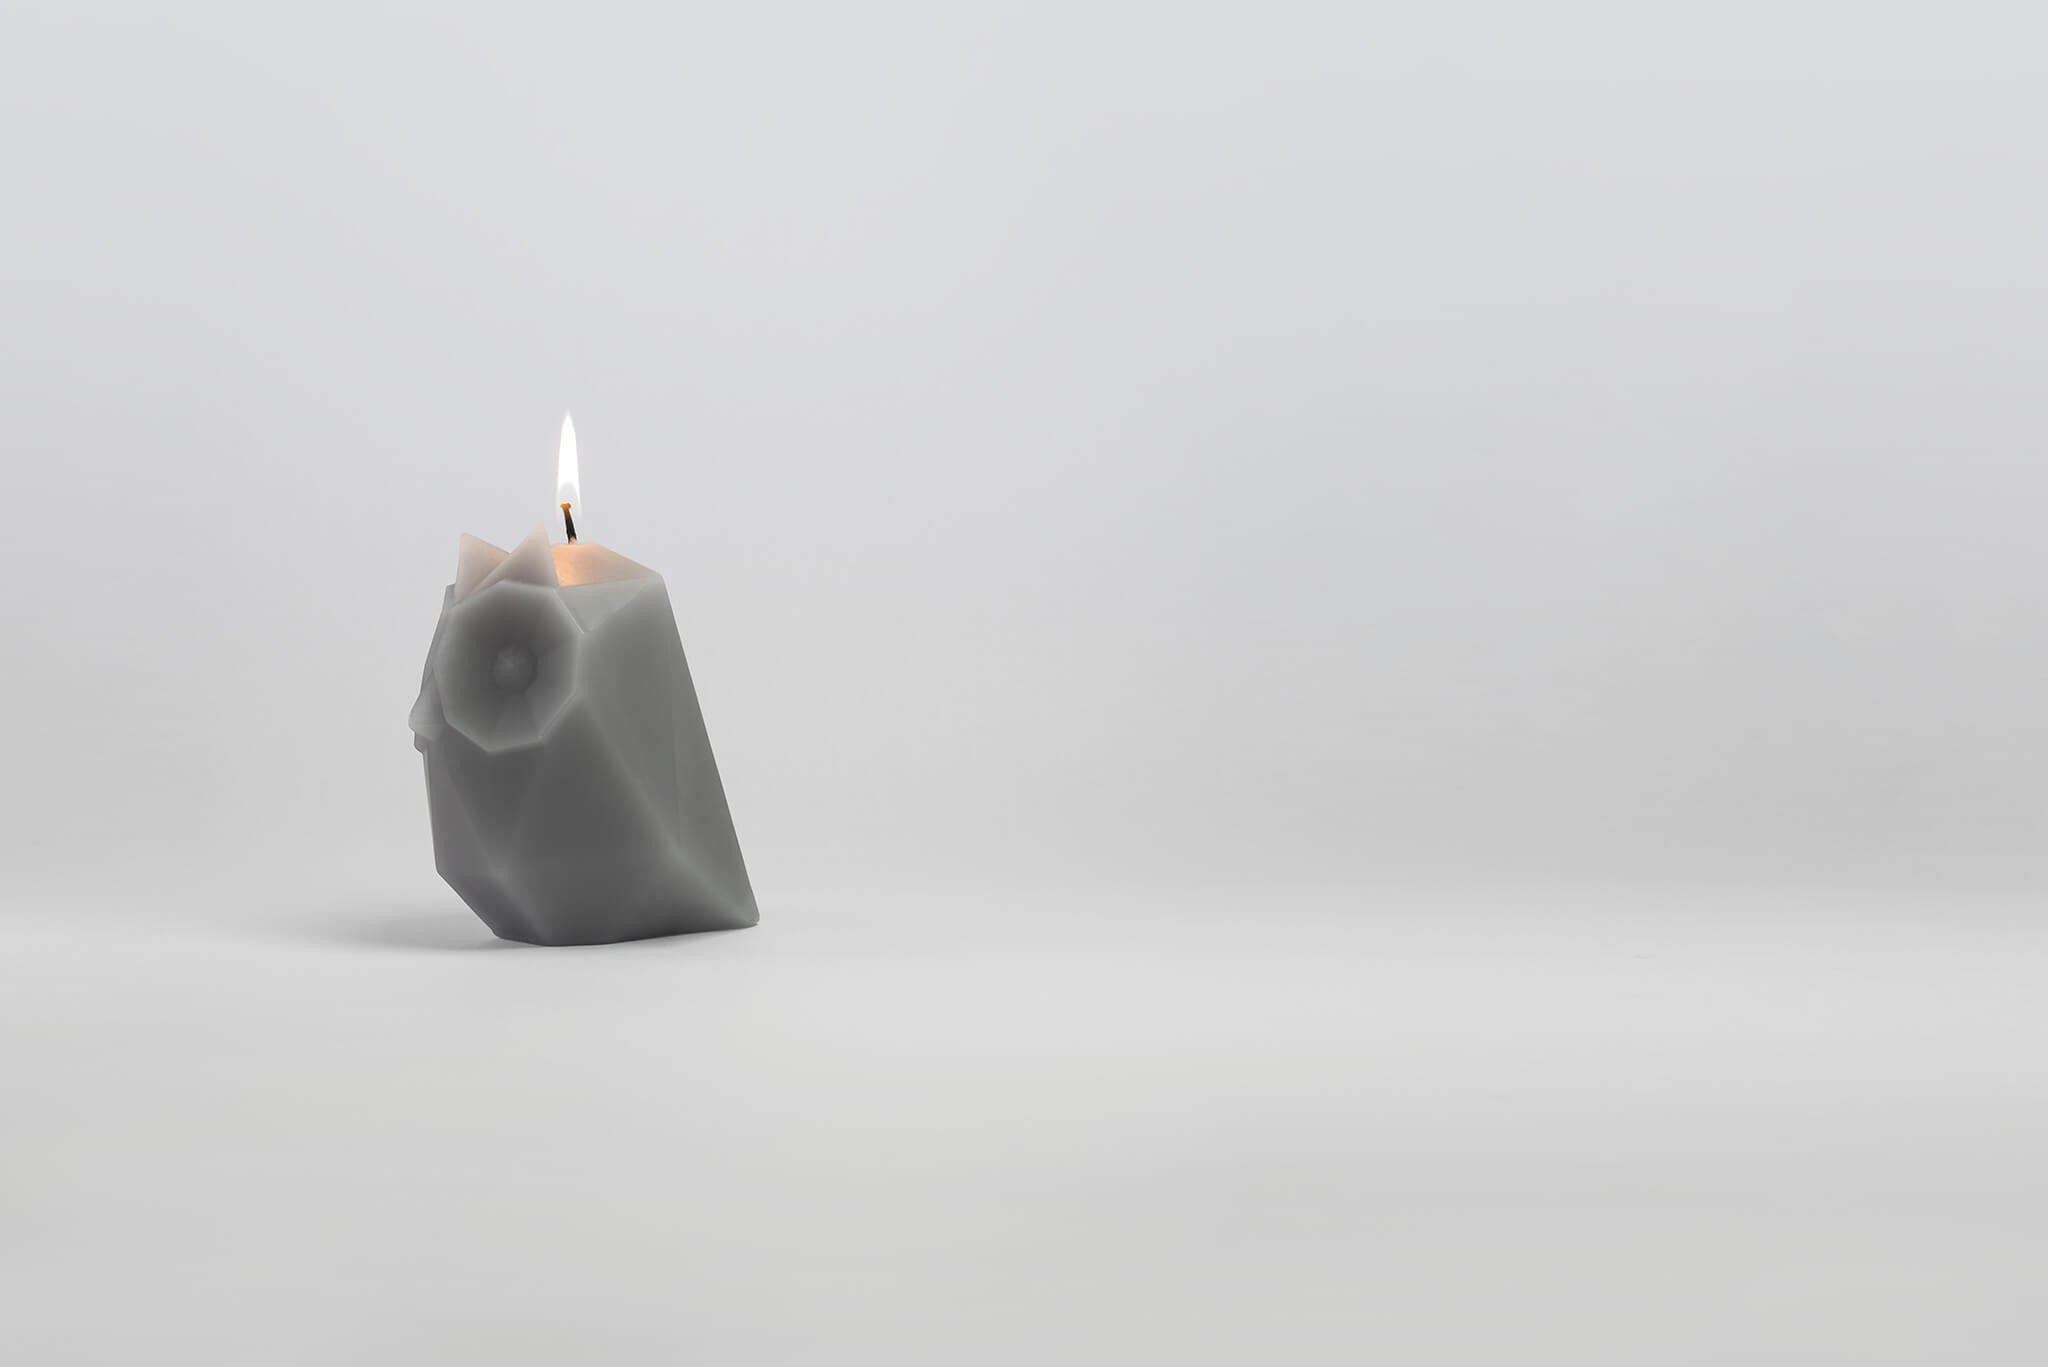 Side view of grey ugla the owl shaped pyropet candle with wick burning.